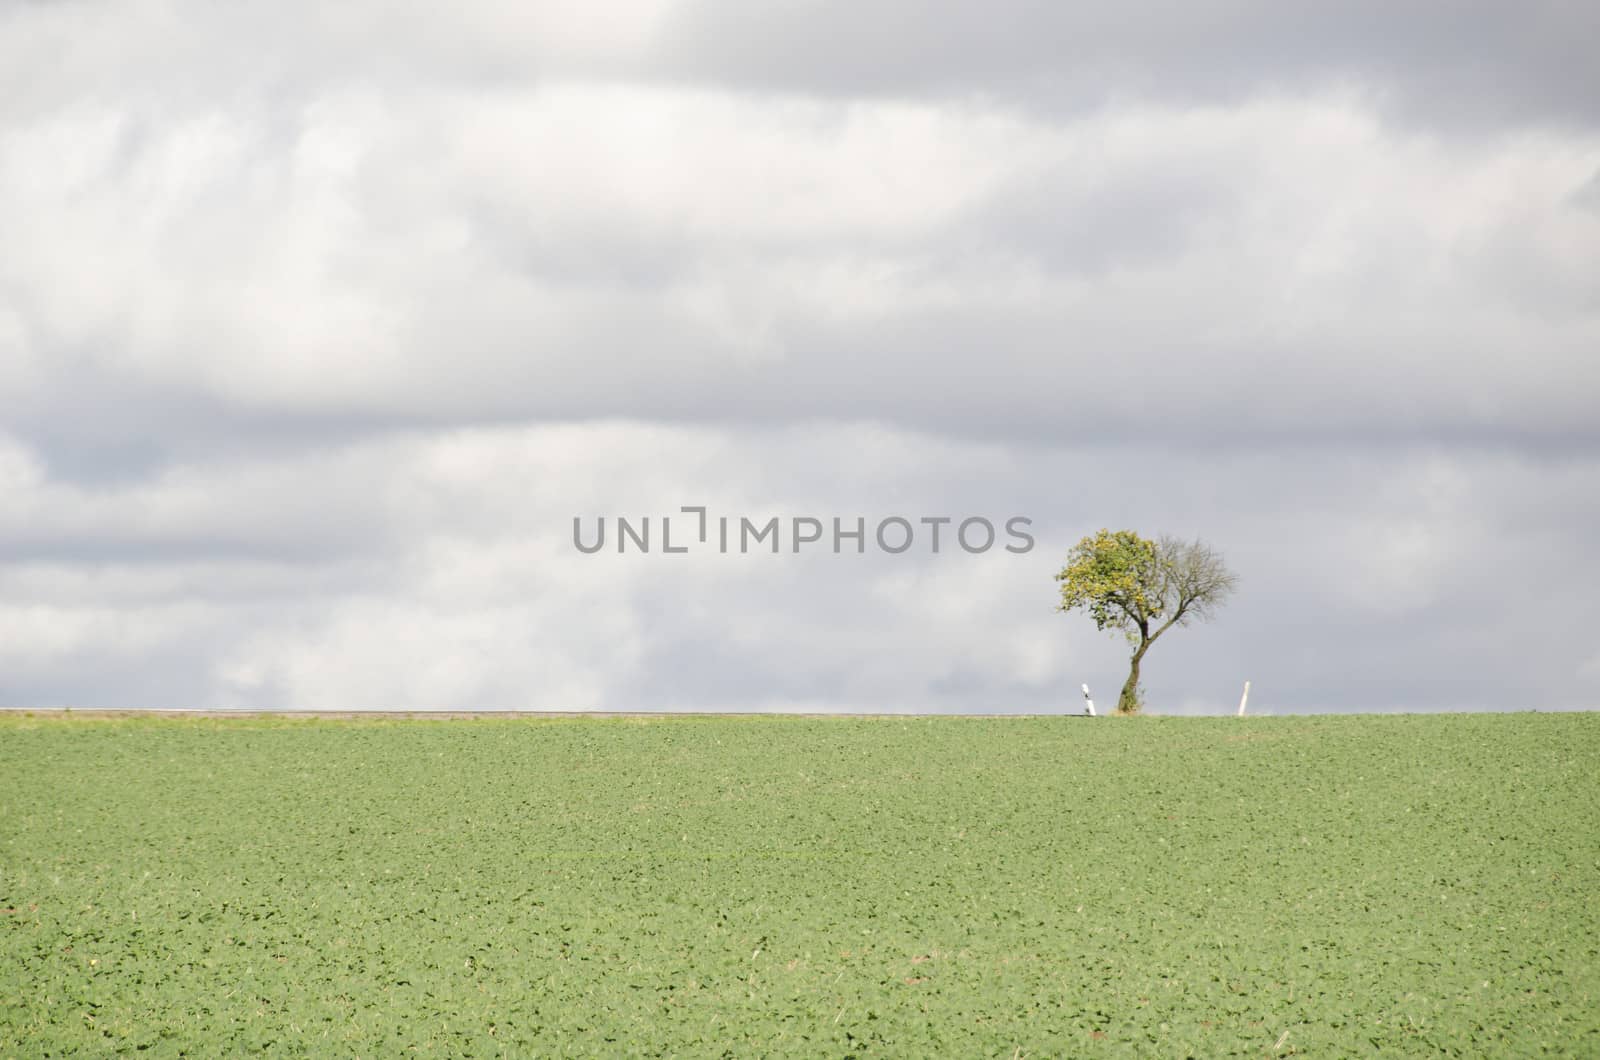 Tree on a field with road by Arrxxx